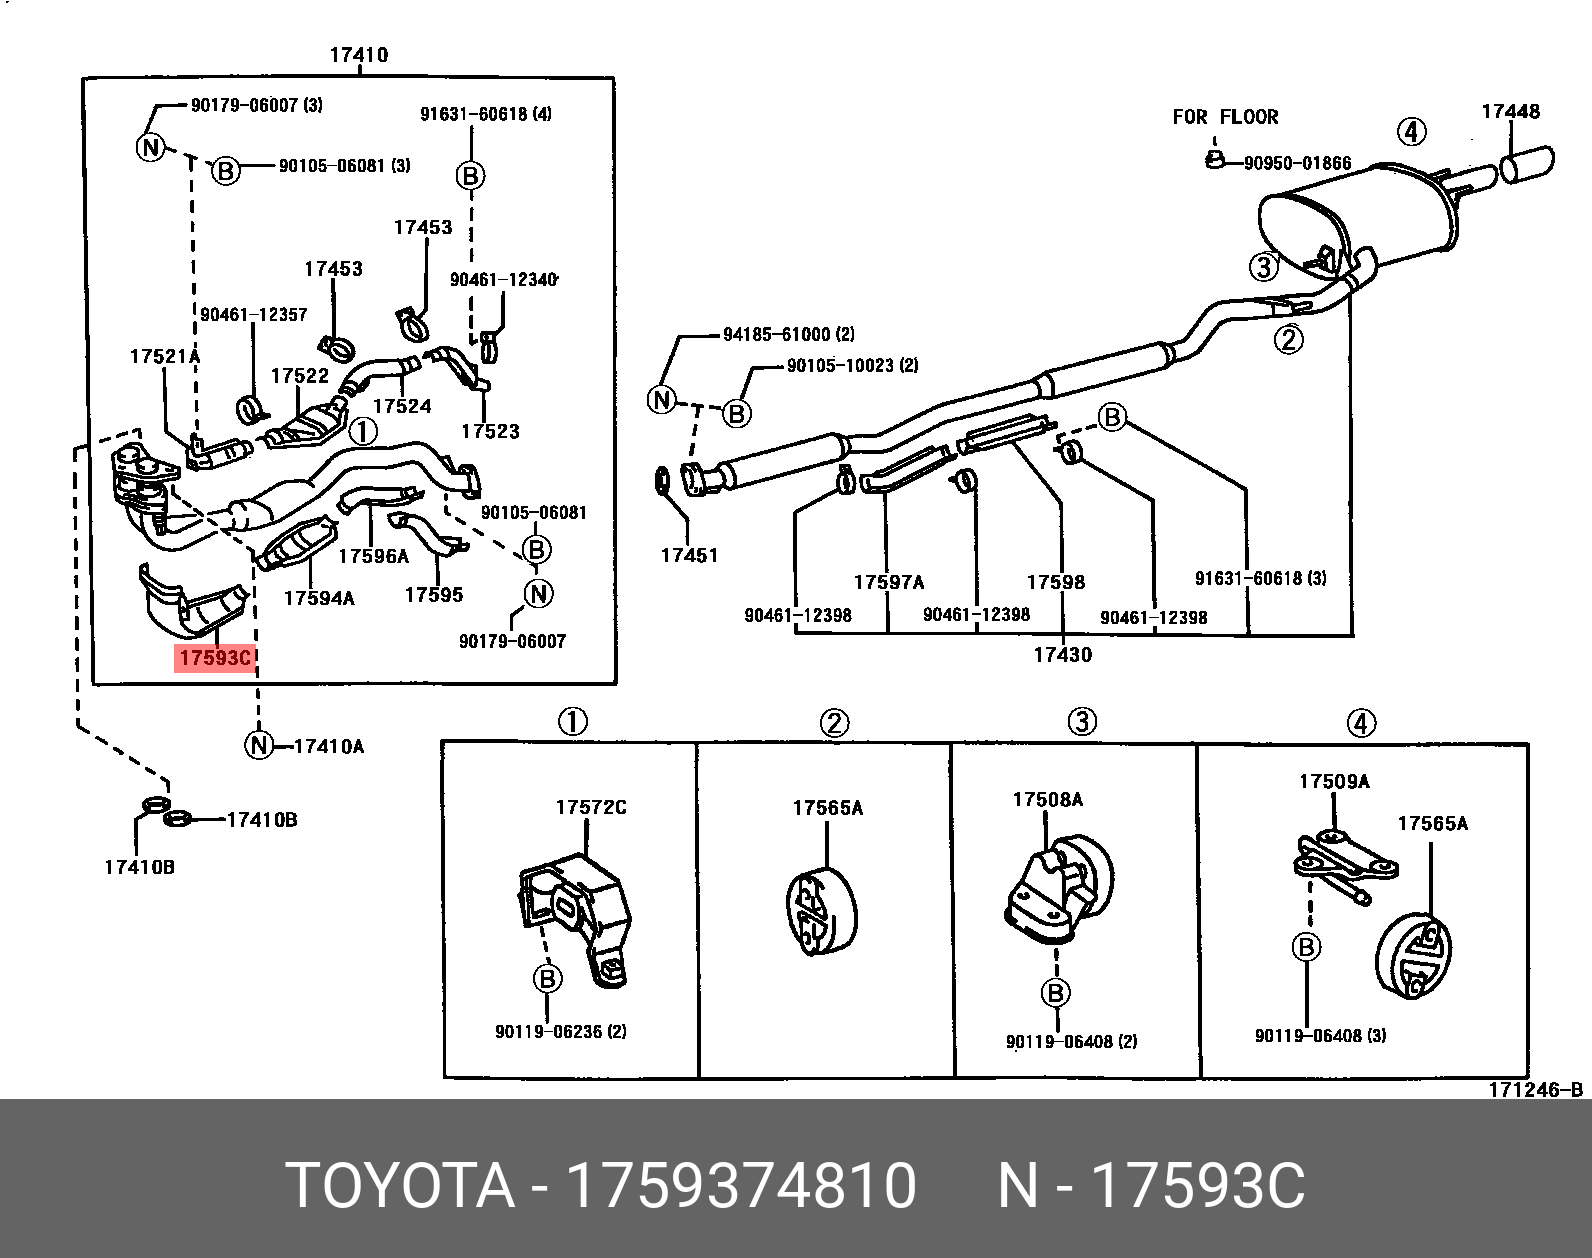 CALDINA 199708 - 200209, PROTECTOR, EXHAUST PIPE, LOWER NO.1